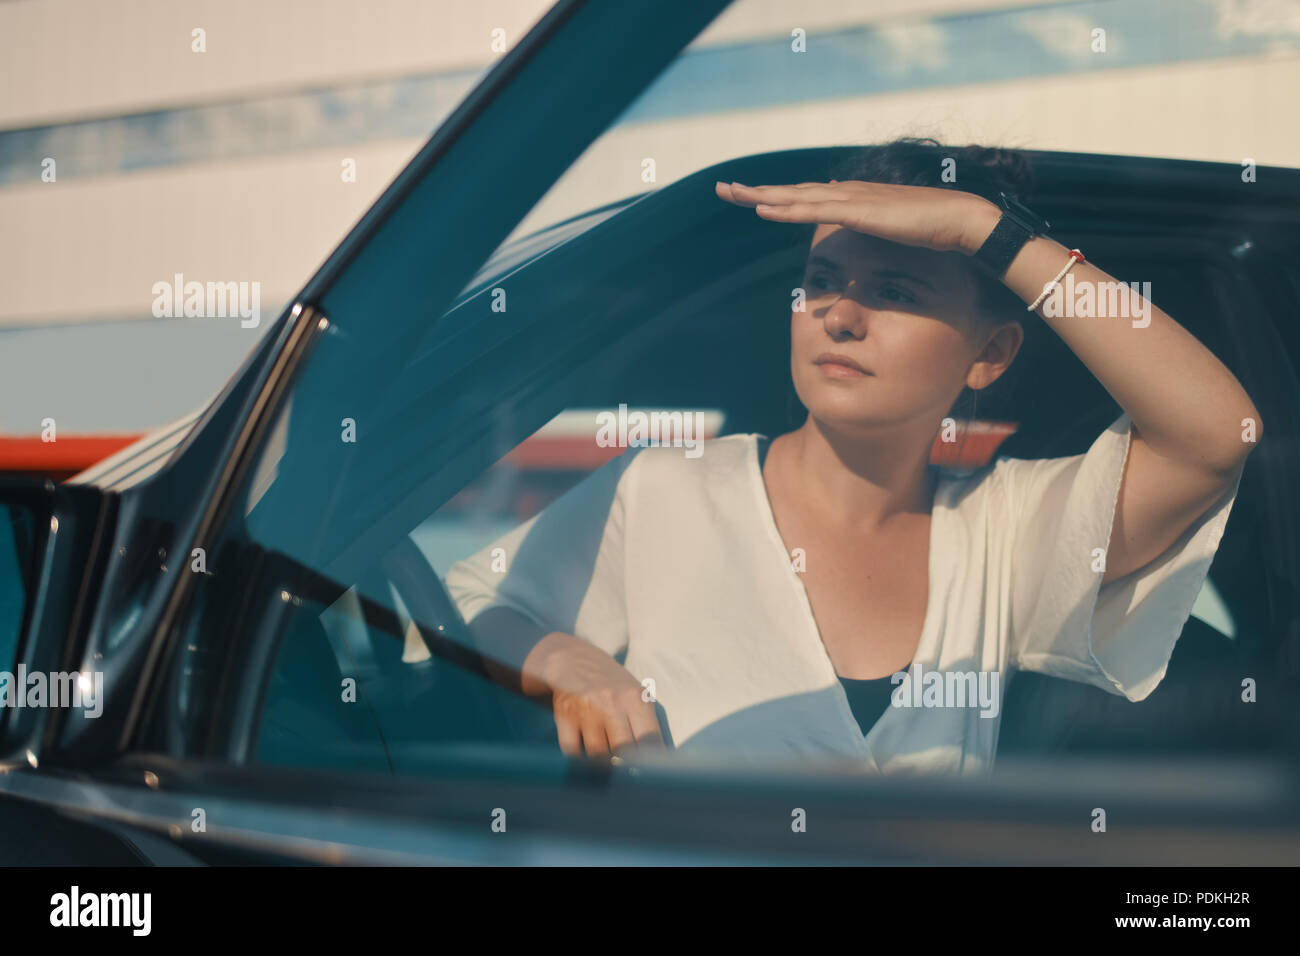 Woman getting down from car searching with eyes for somebody Stock Photo